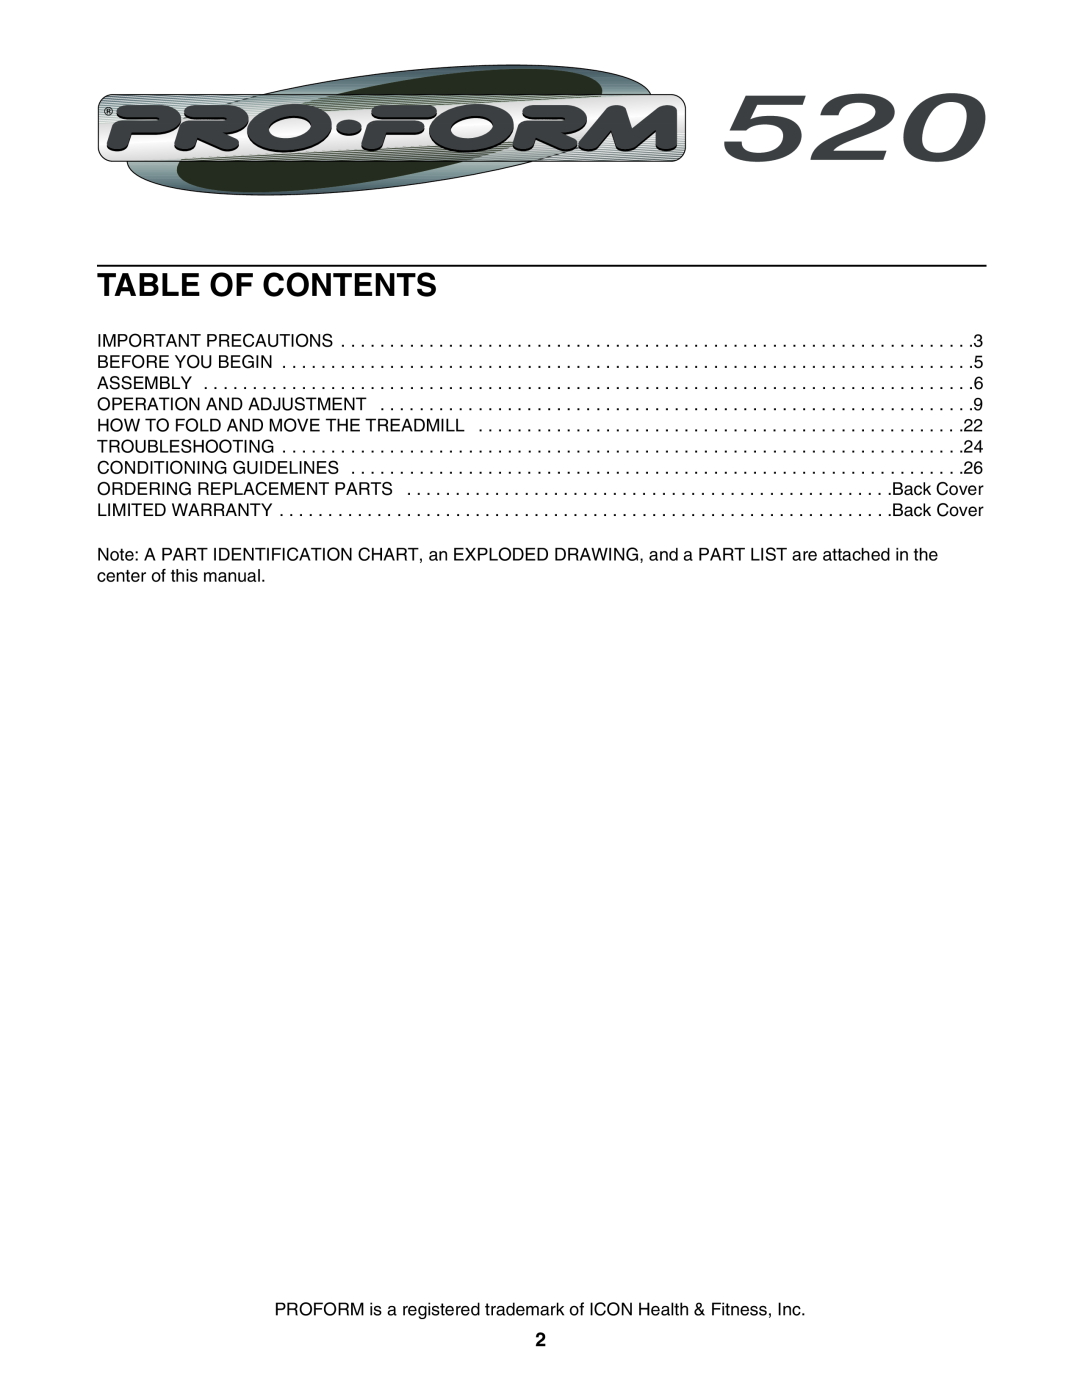 ProForm PFTL59023 user manual Table Of Contents, PROFORM is a registered trademark of ICON Health & Fitness, Inc 